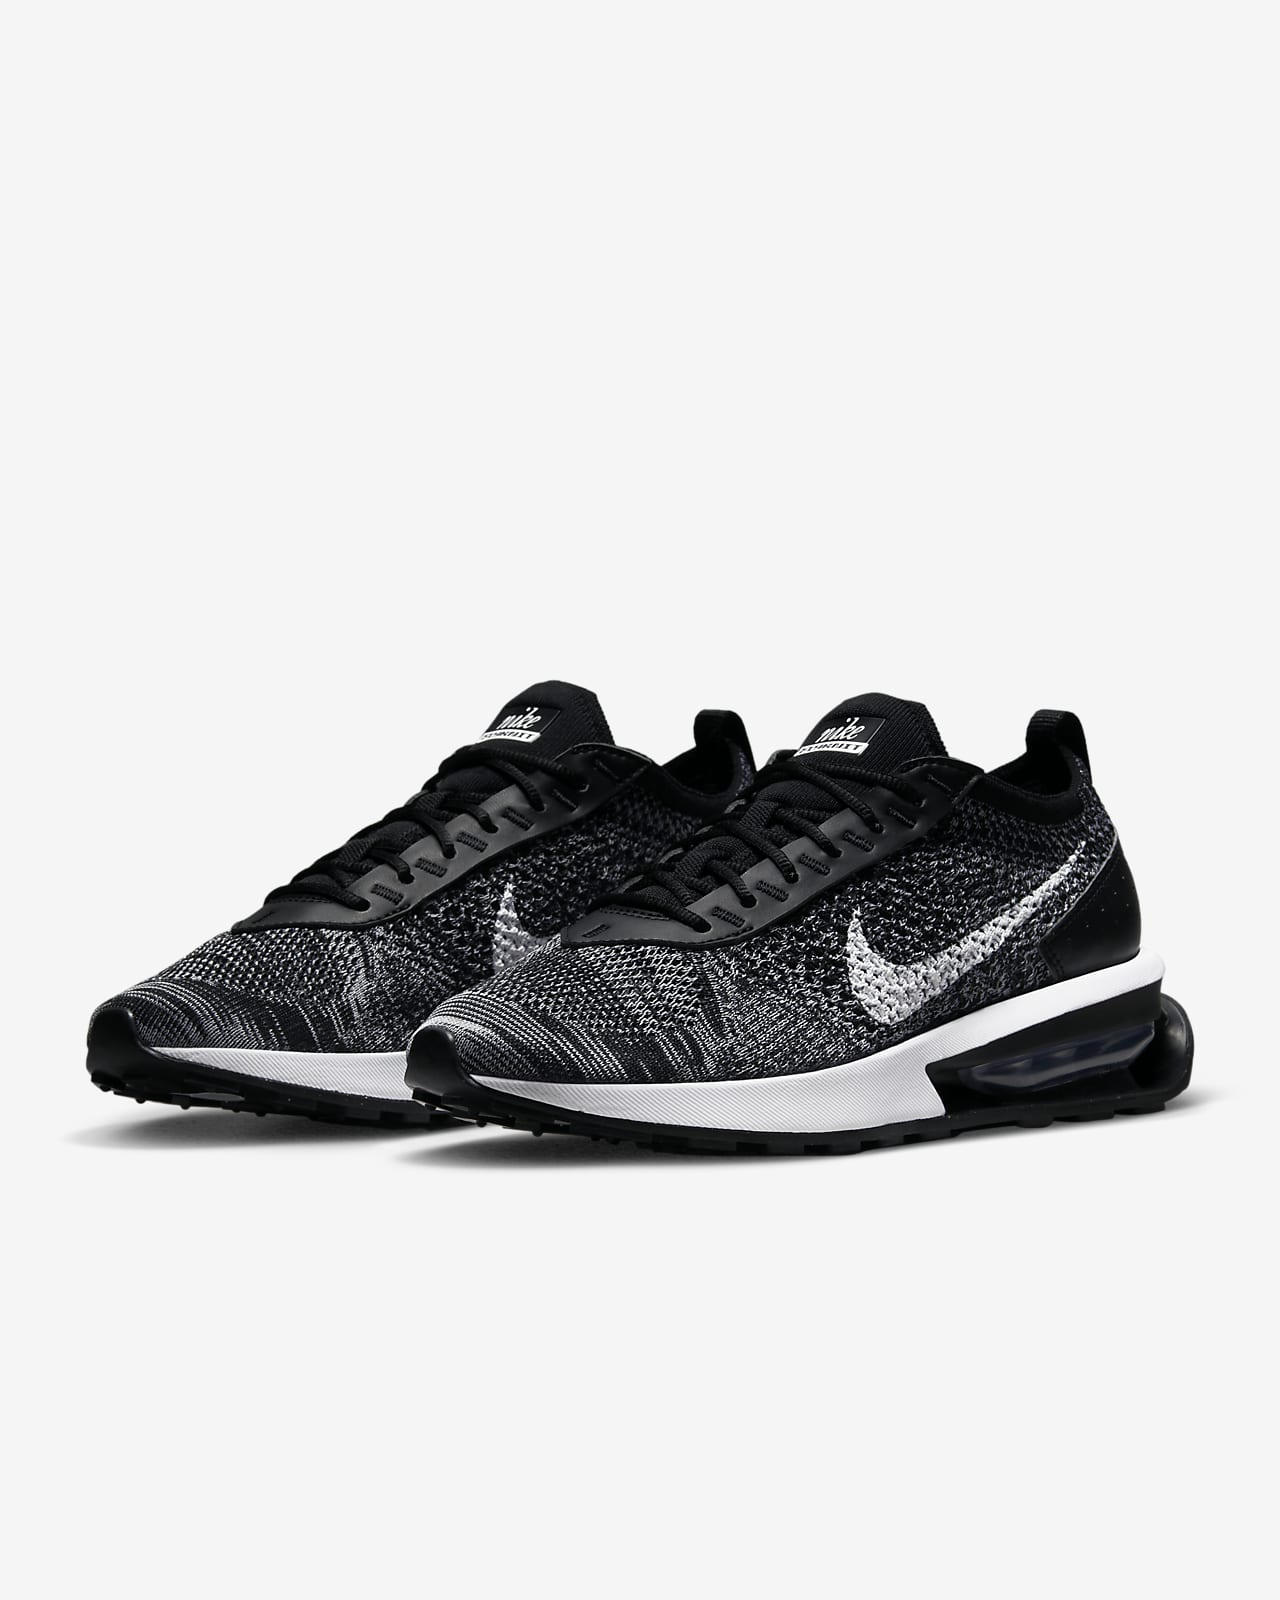 Agacharse China Señora Nike Air Max Flyknit Racer Women's Shoes. Nike MY